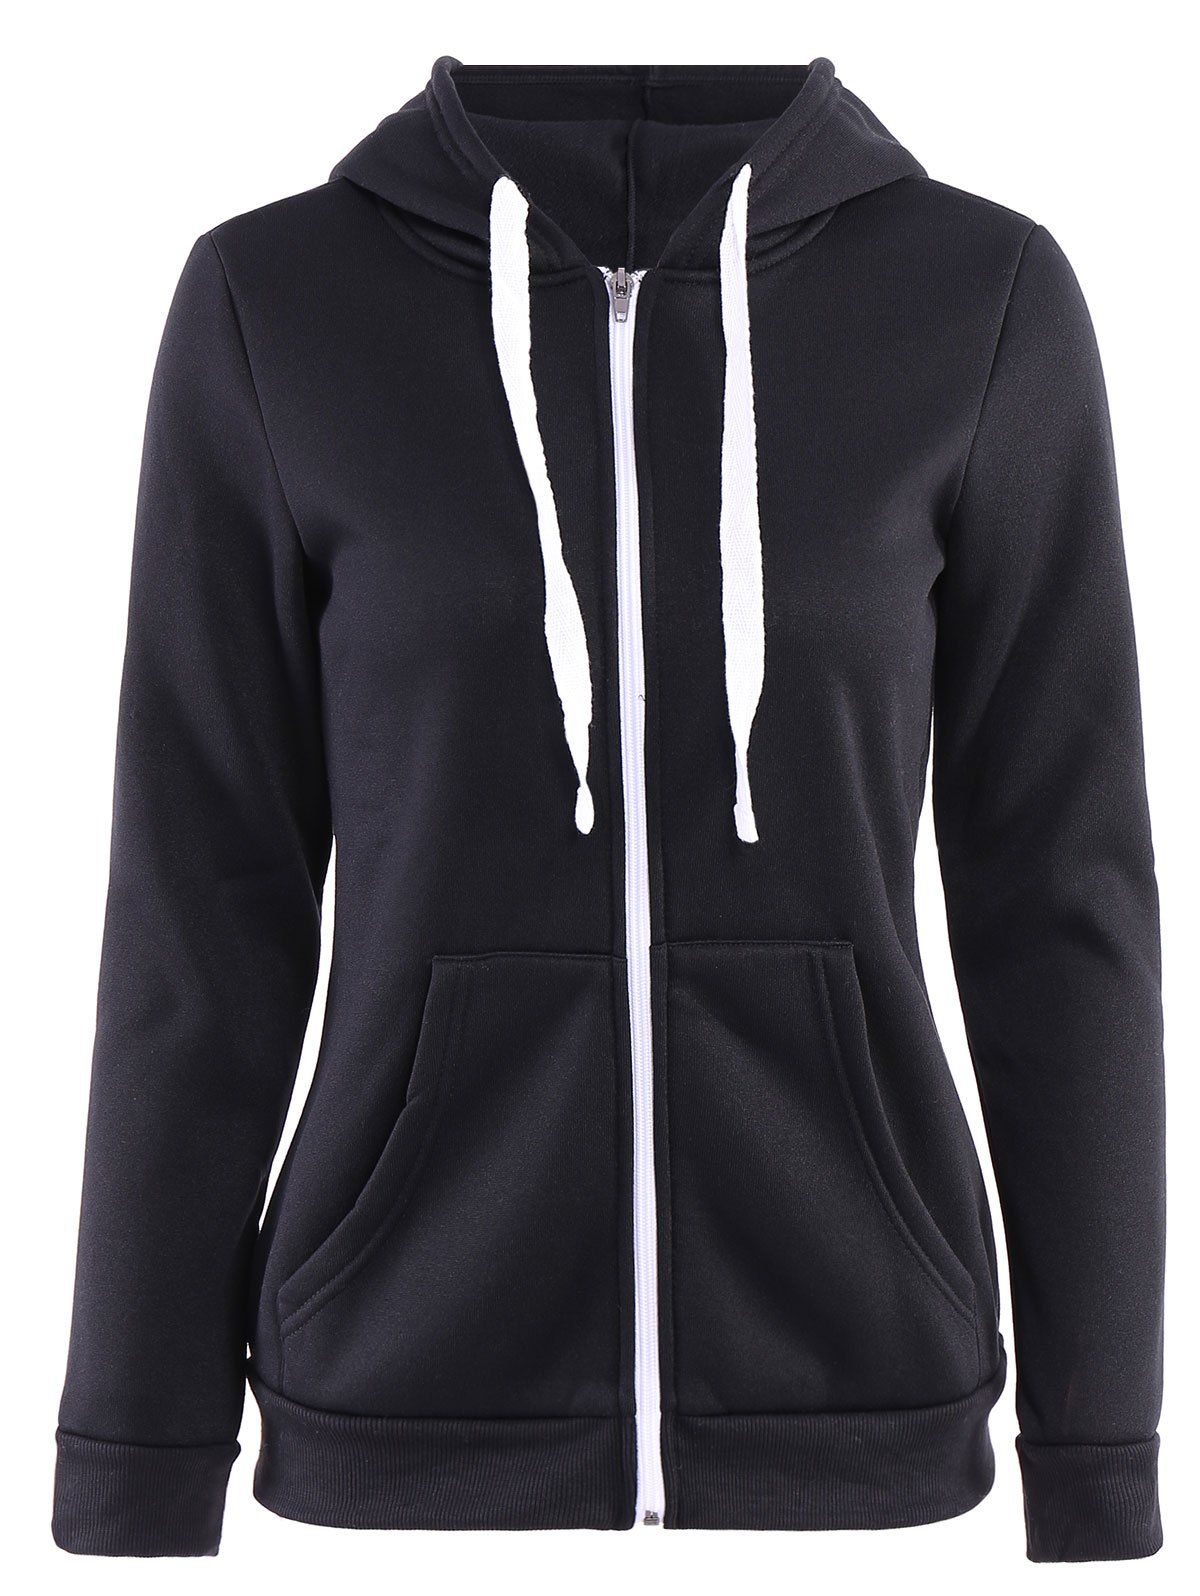 Stylish Hooded Long Sleeve Solid Color Zip Up Women's Hoodie, BLACK, L ...